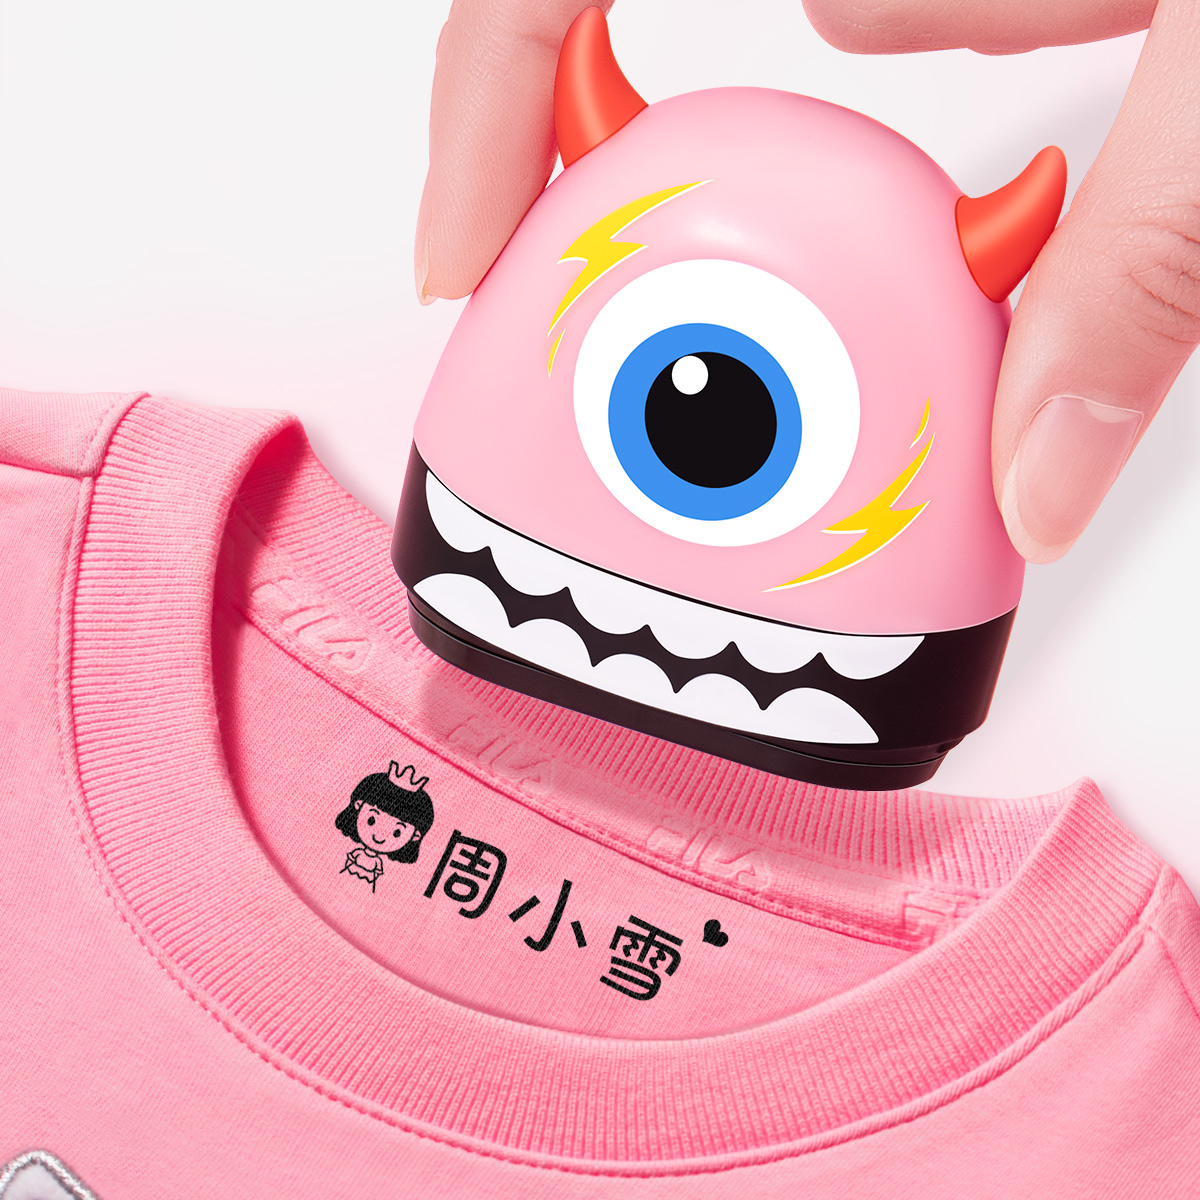 Kindergarten name sticker baby school uniform embroidery name sticker paper children's clothing stamp waterproof can be customized without sewing